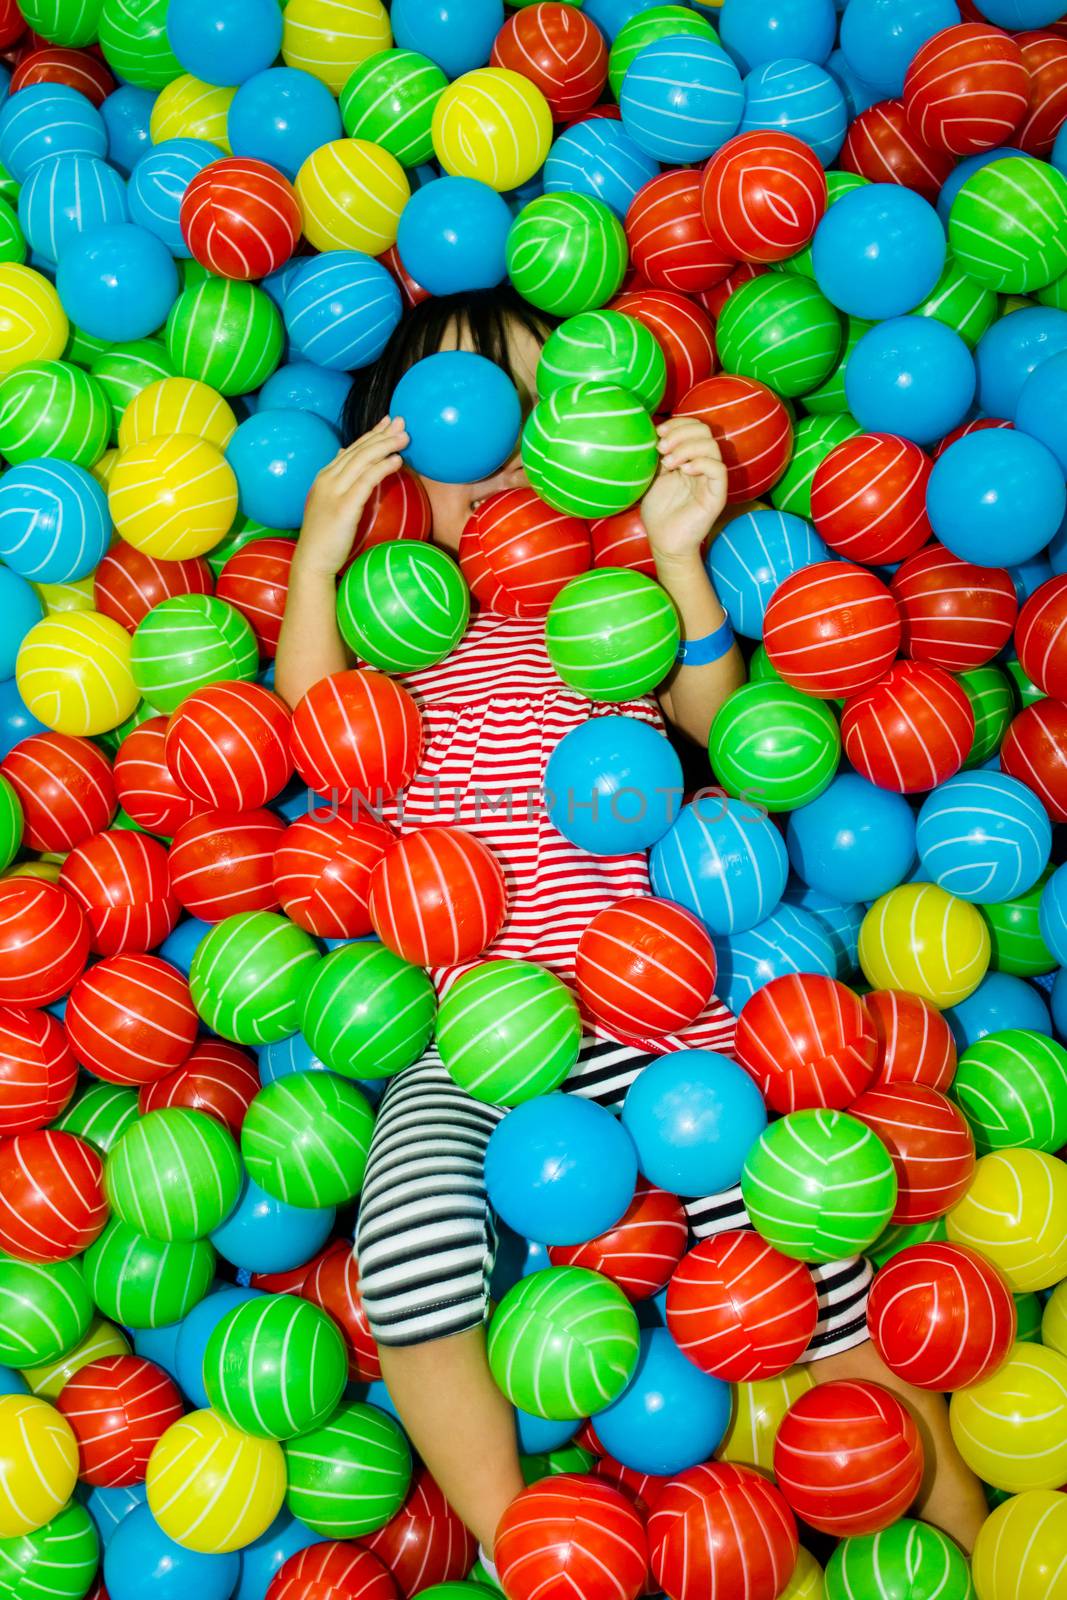 Asian Chinese girl hide in colorful ball pool at indoor playground.